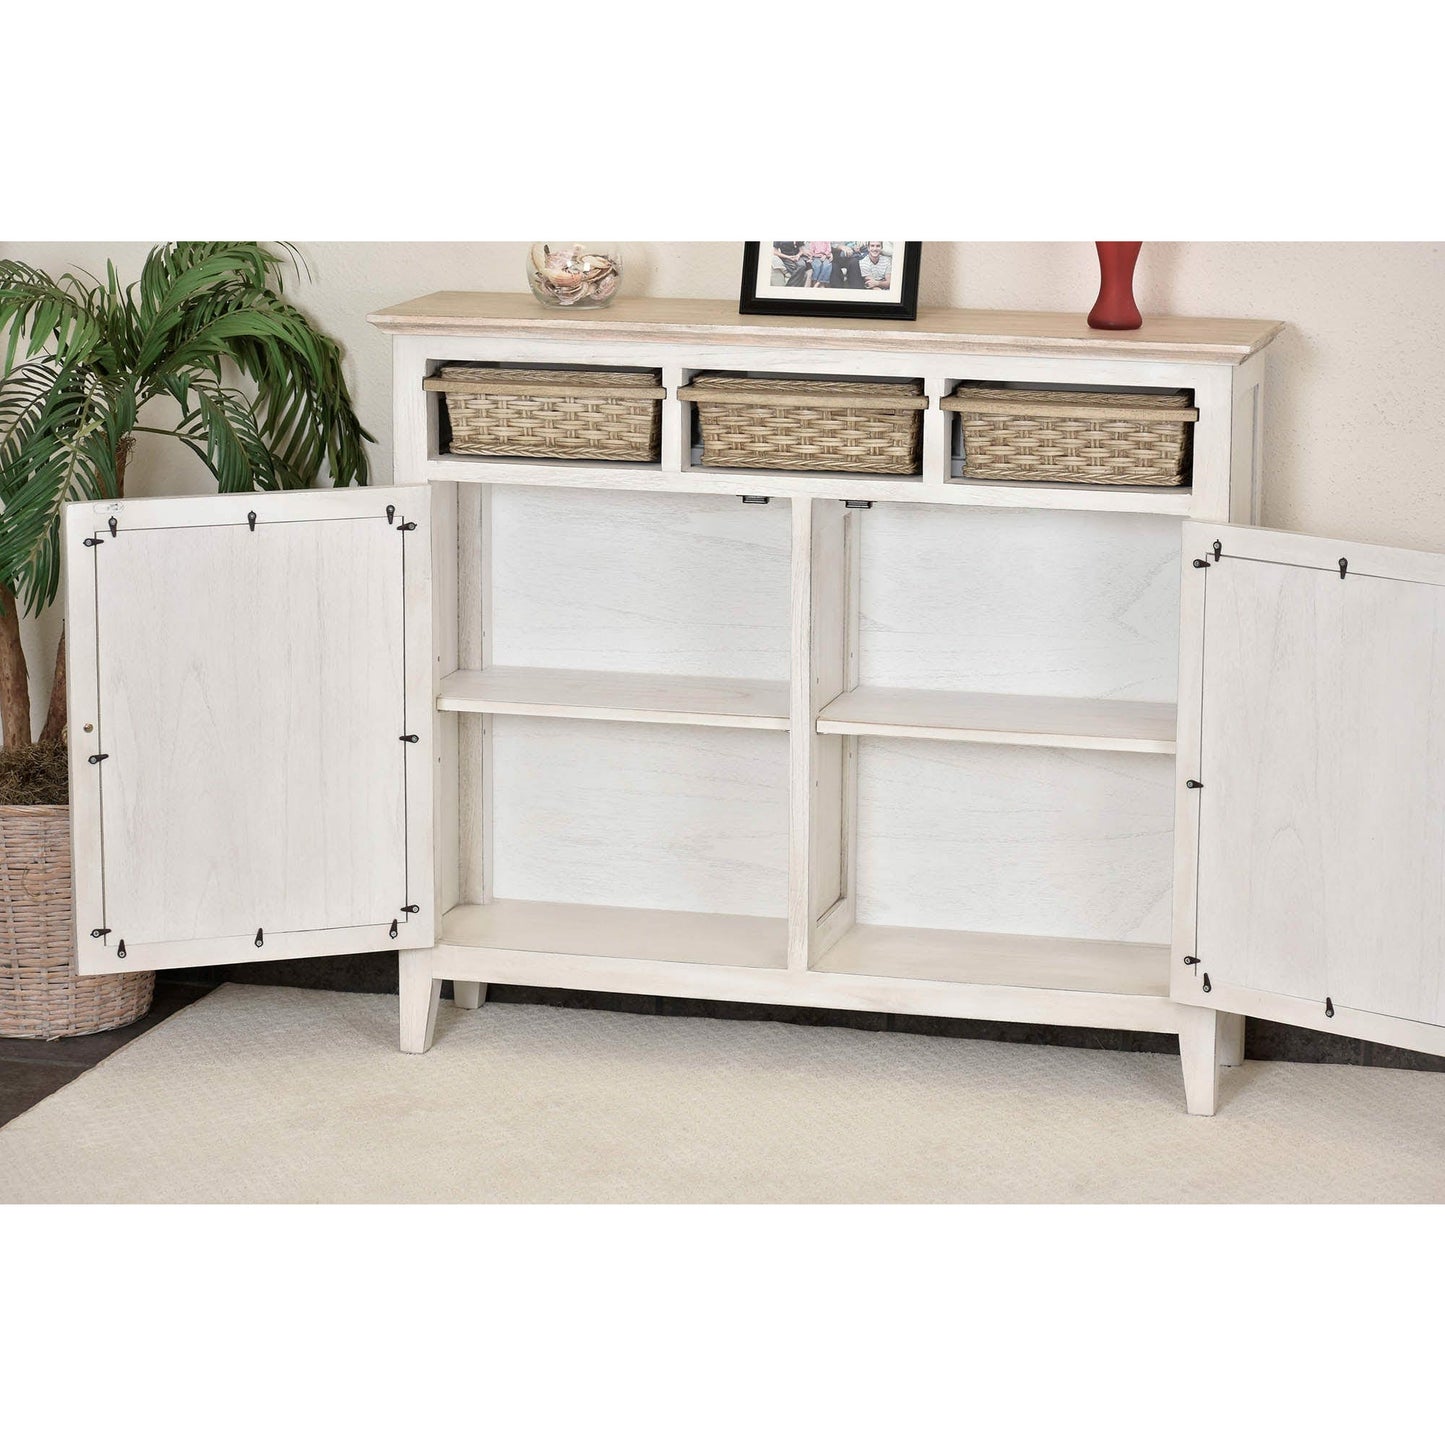 Sea Winds Trading Captiva Island Entry Cabinet with Baskets B86322 Indoor Sea Winds Trading Co 